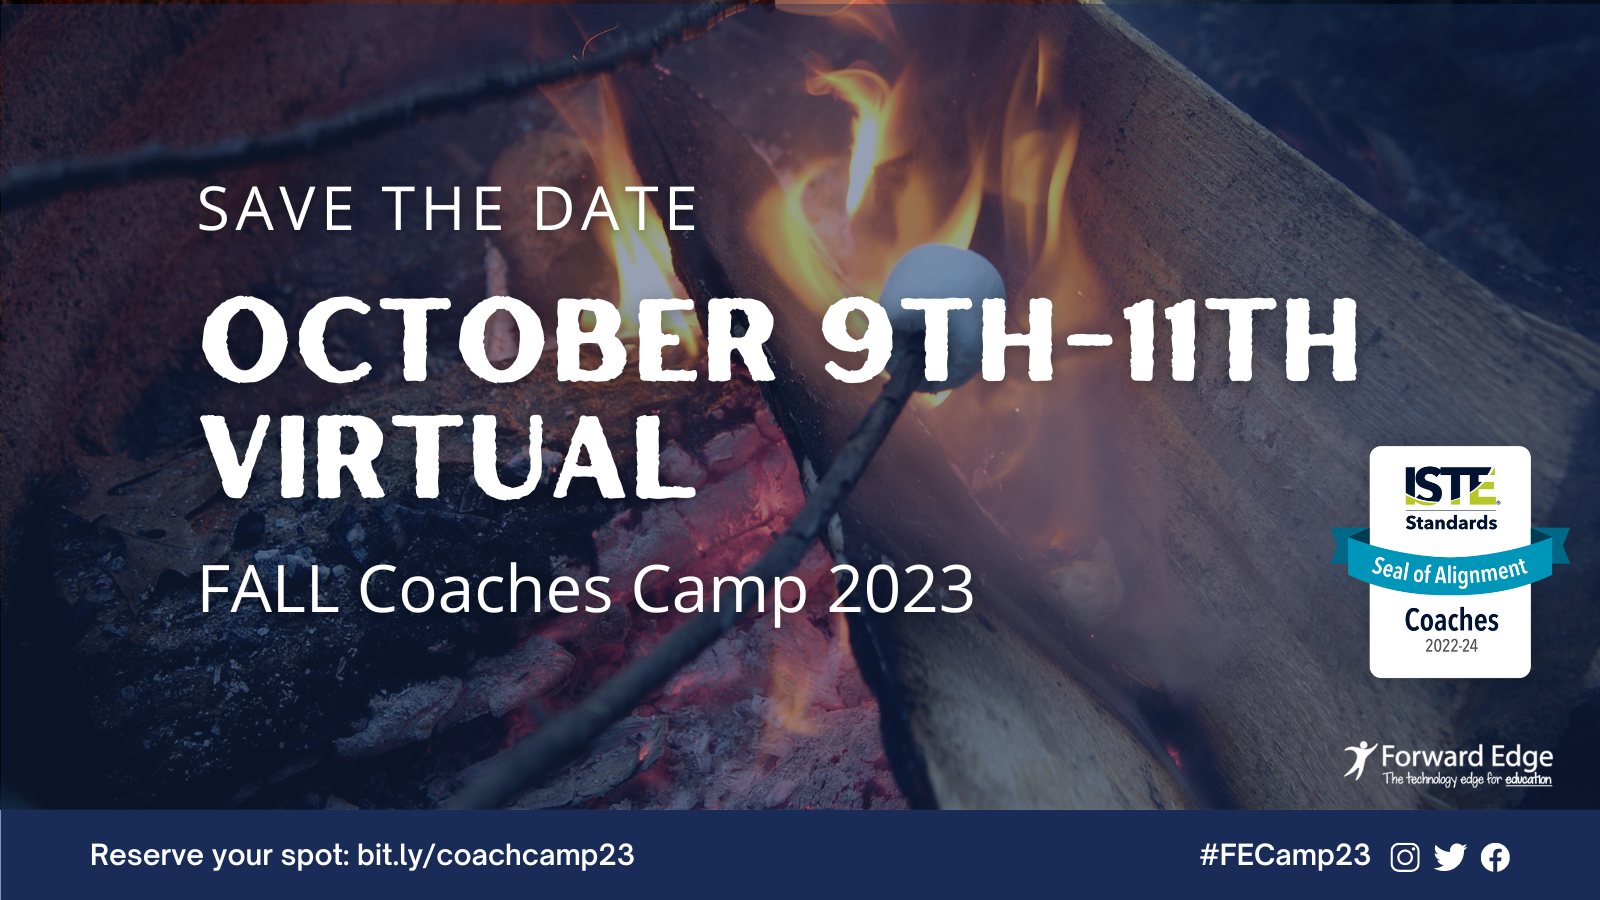 Save the date. October 9th-11th Virtual. Fall Coaches Camp 2023.